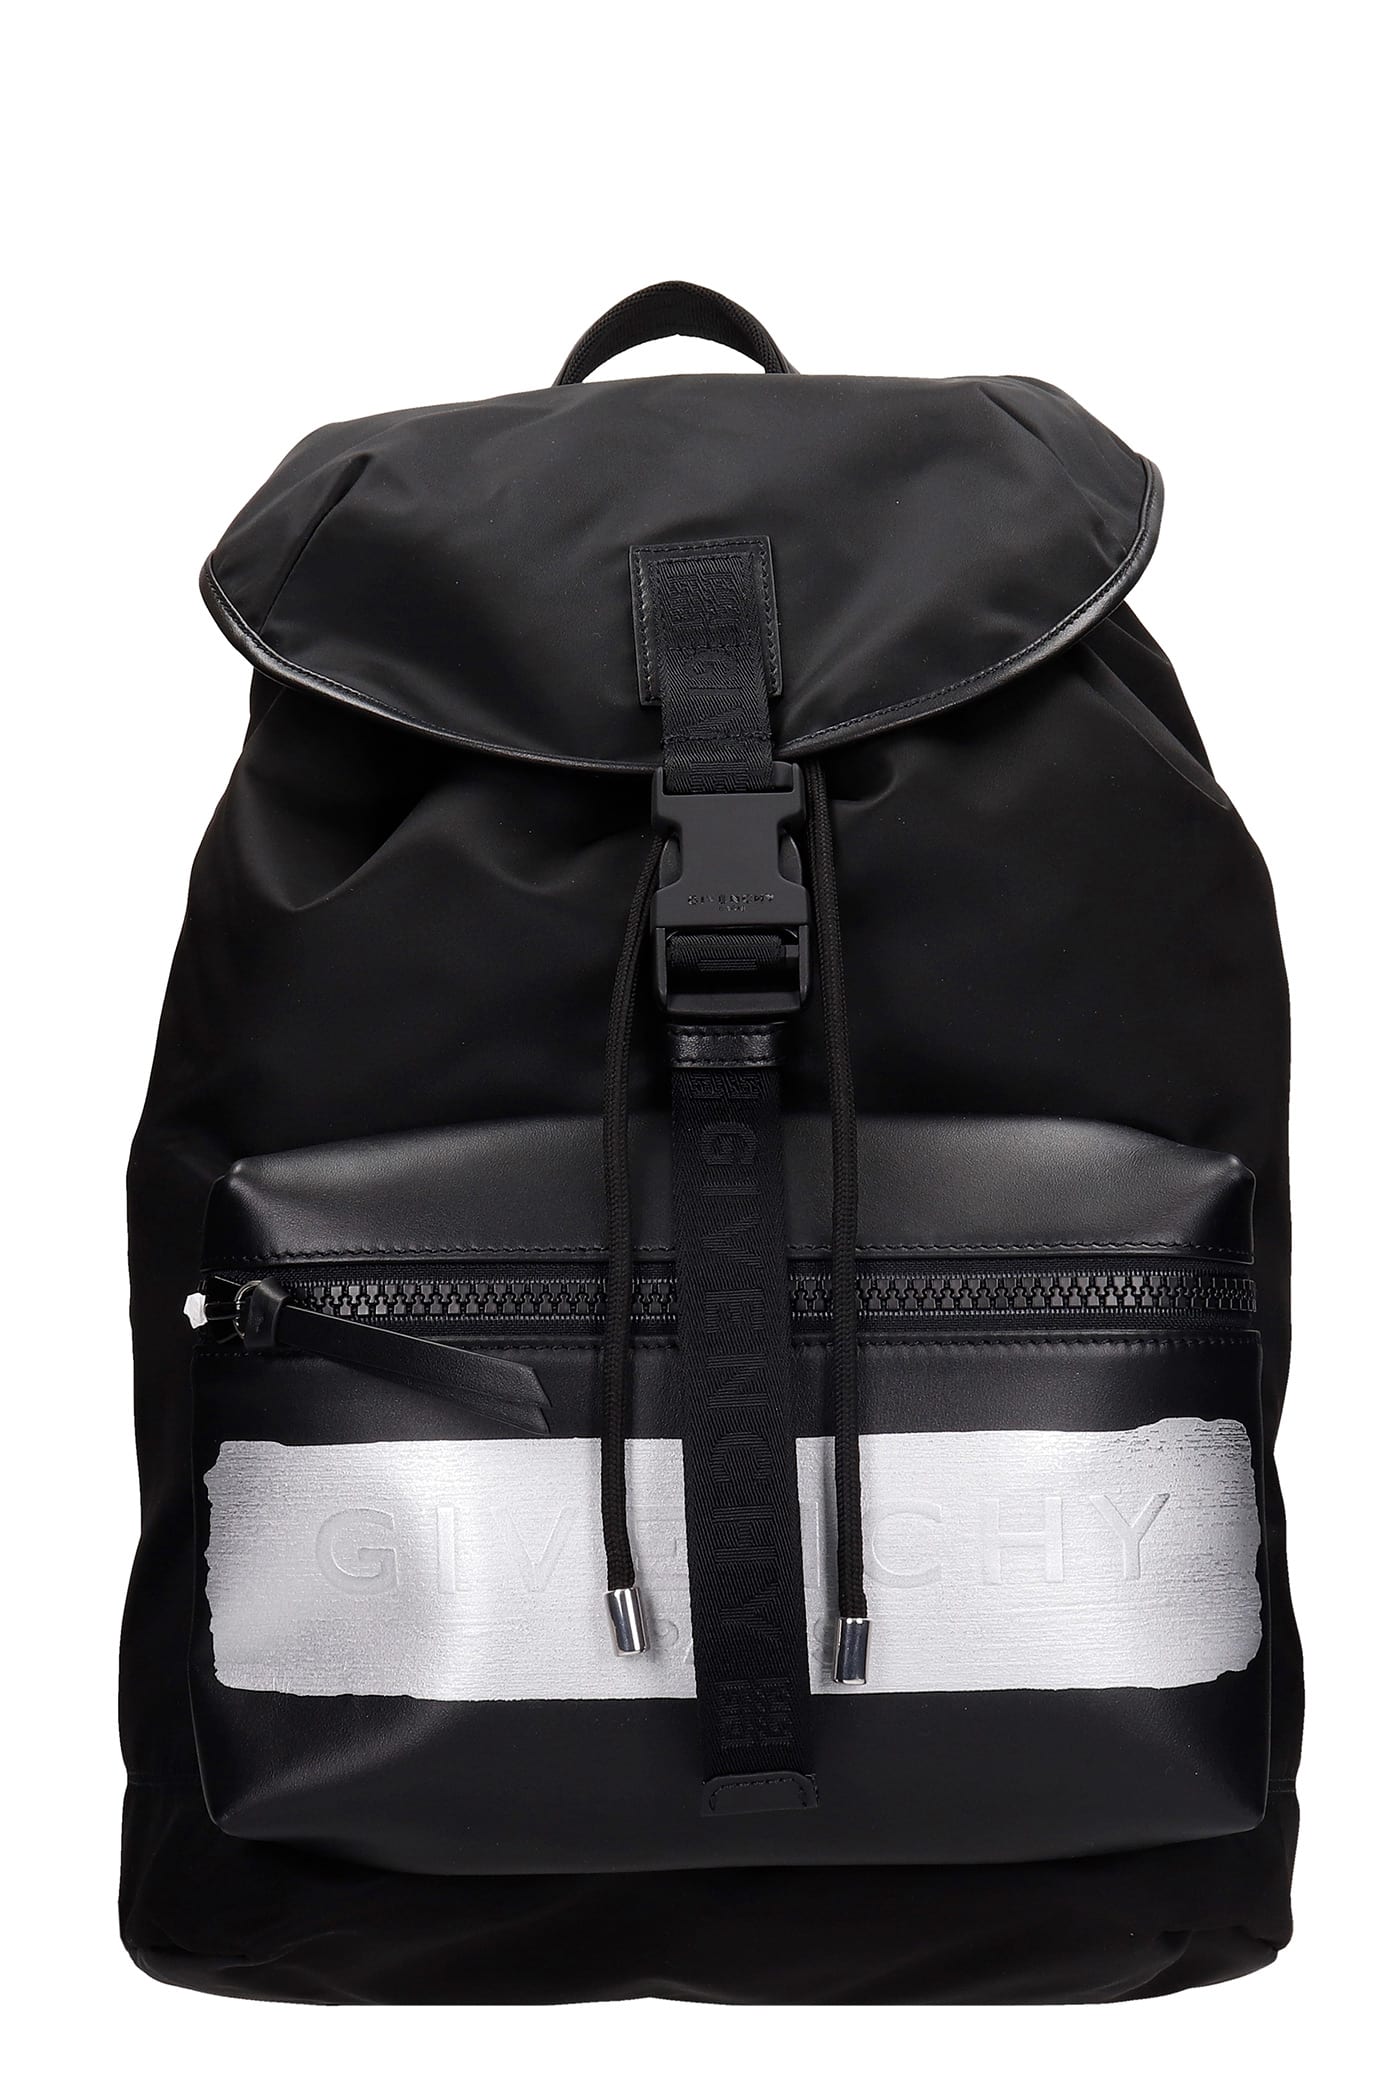 Givenchy Backpack In Black Nylon